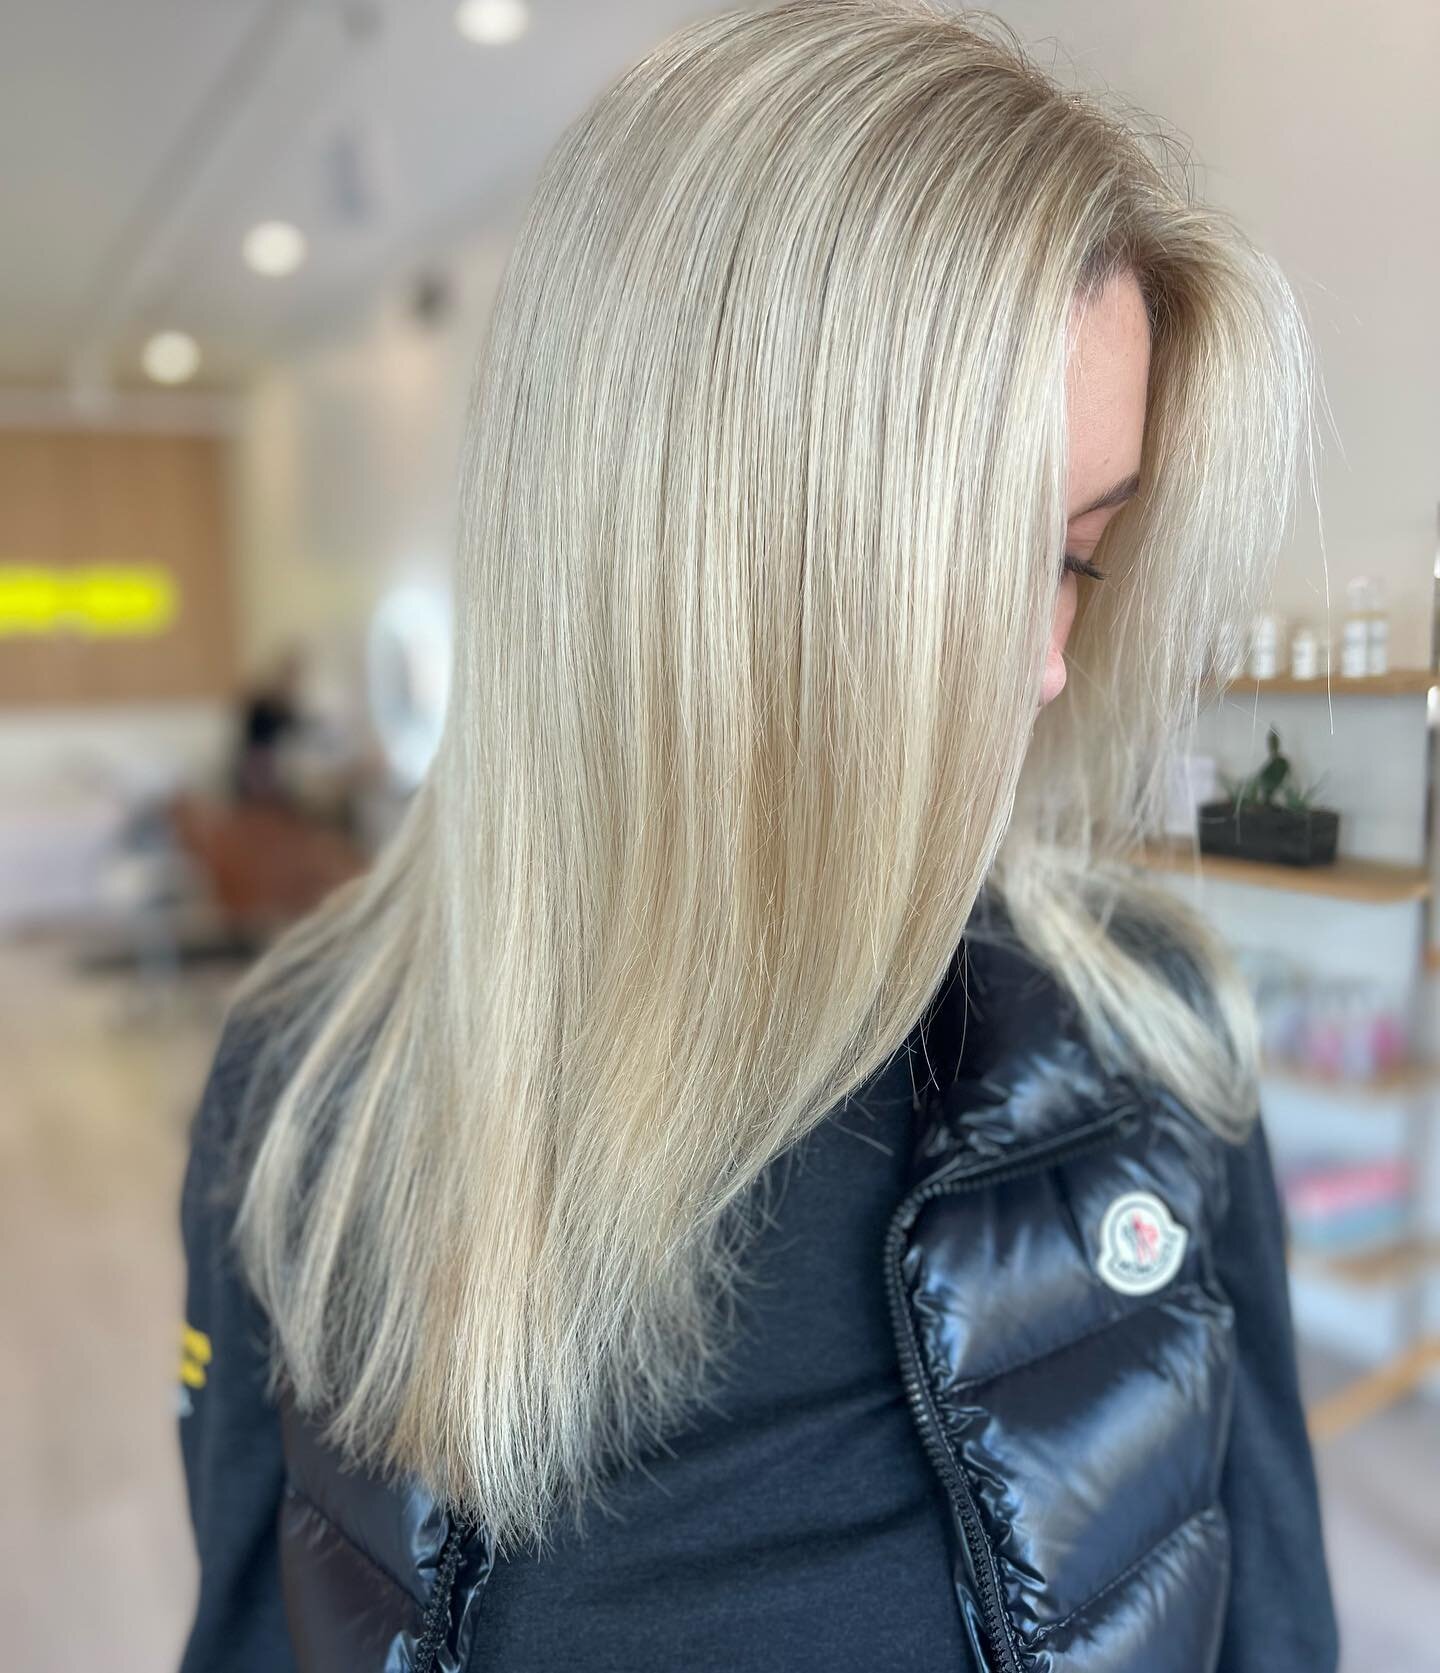 While we are loving all the fall hair, here&rsquo;s your reminder that blonde is always in season✨
Hair by @24kgoldandsass 

#staygold #kalamazoosalon #downtownkalanazoo #kalamazoohairsytlist #wmu #blondehair #redkenshadeseq #goldwell #randco #highli